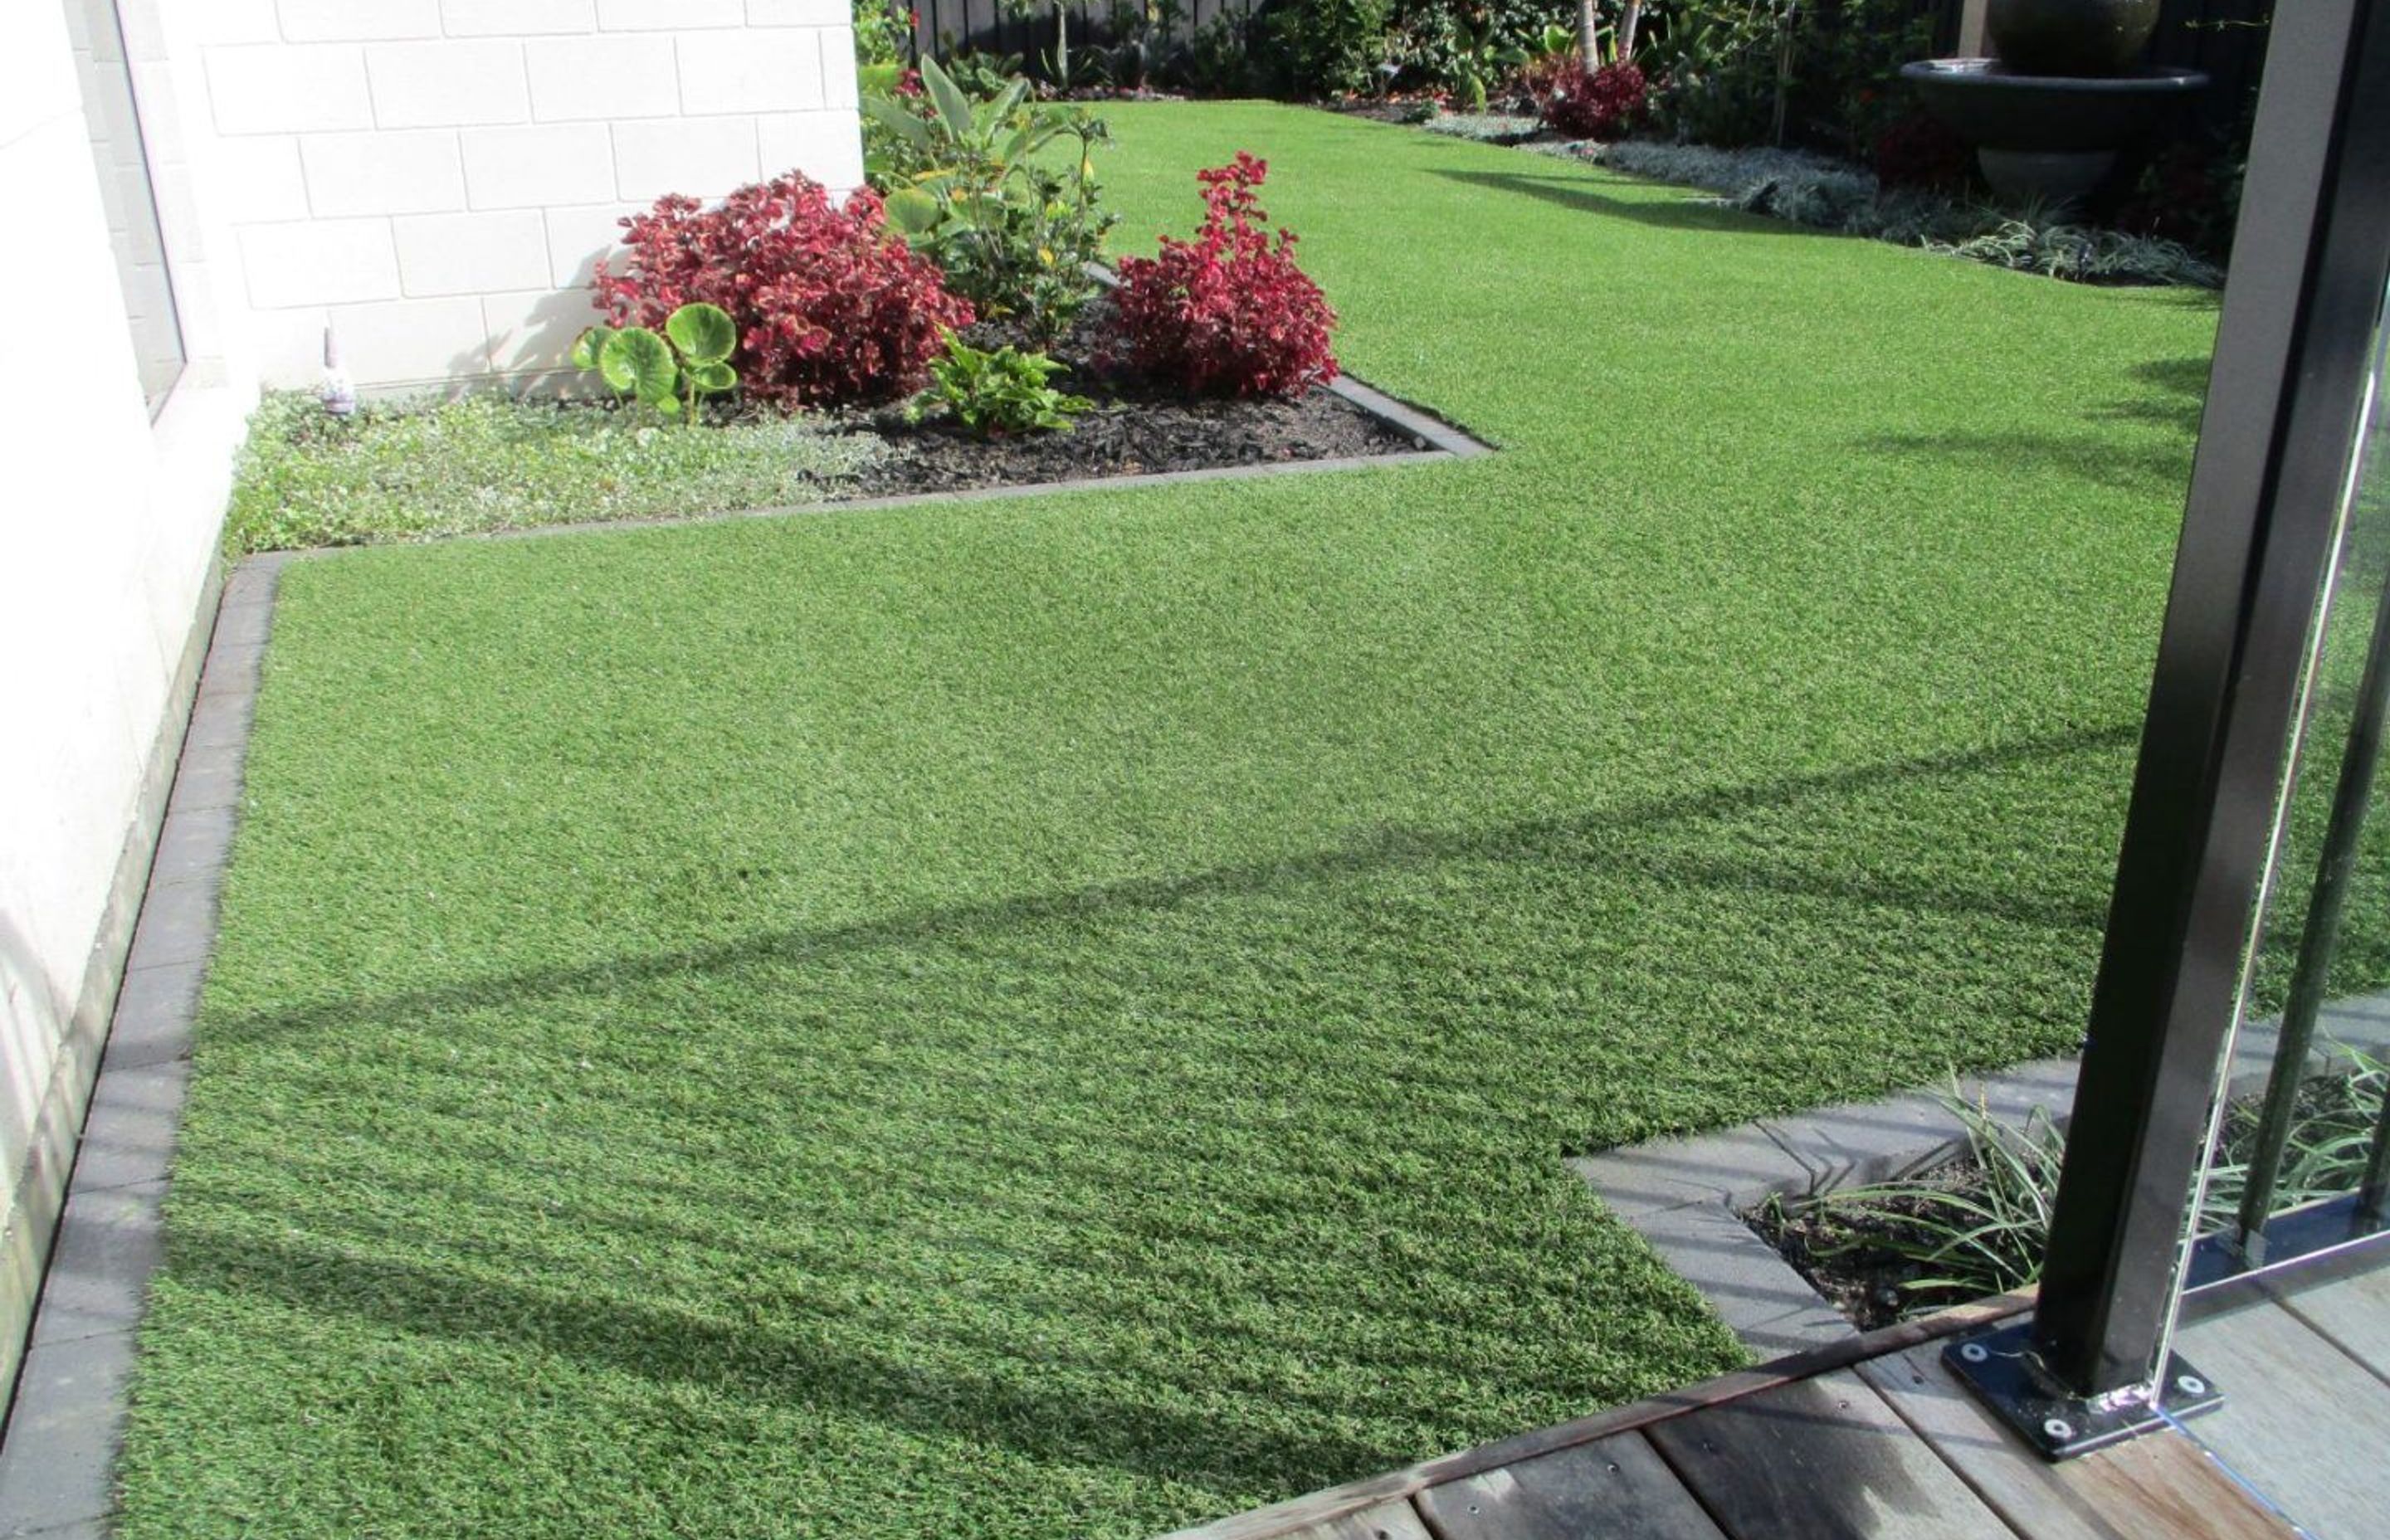 TigerTurf Indian Summer lawn adds grace to your home and brings you lasting benefits